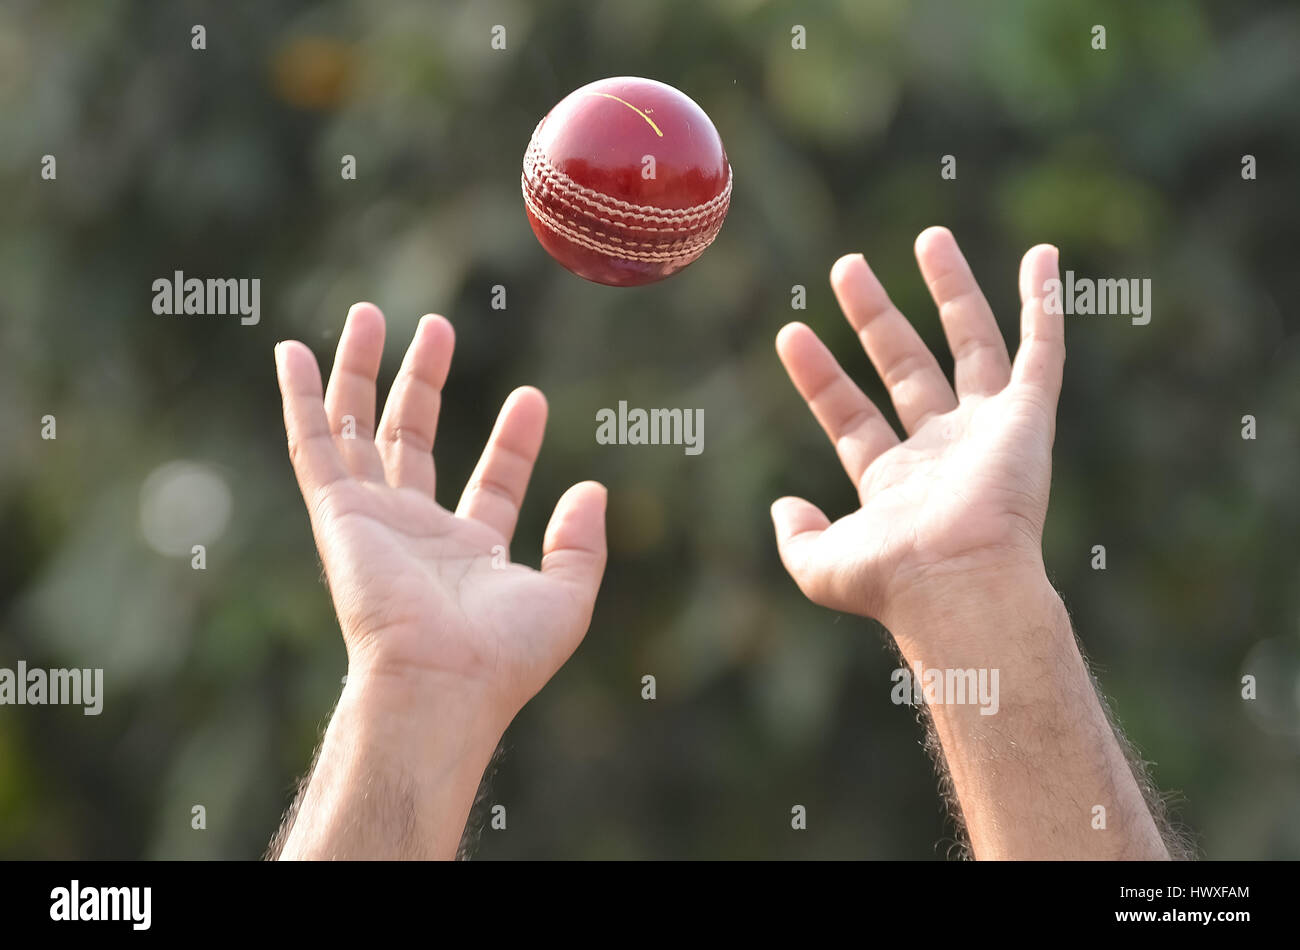 A cricket player catching a ball Stock Photo